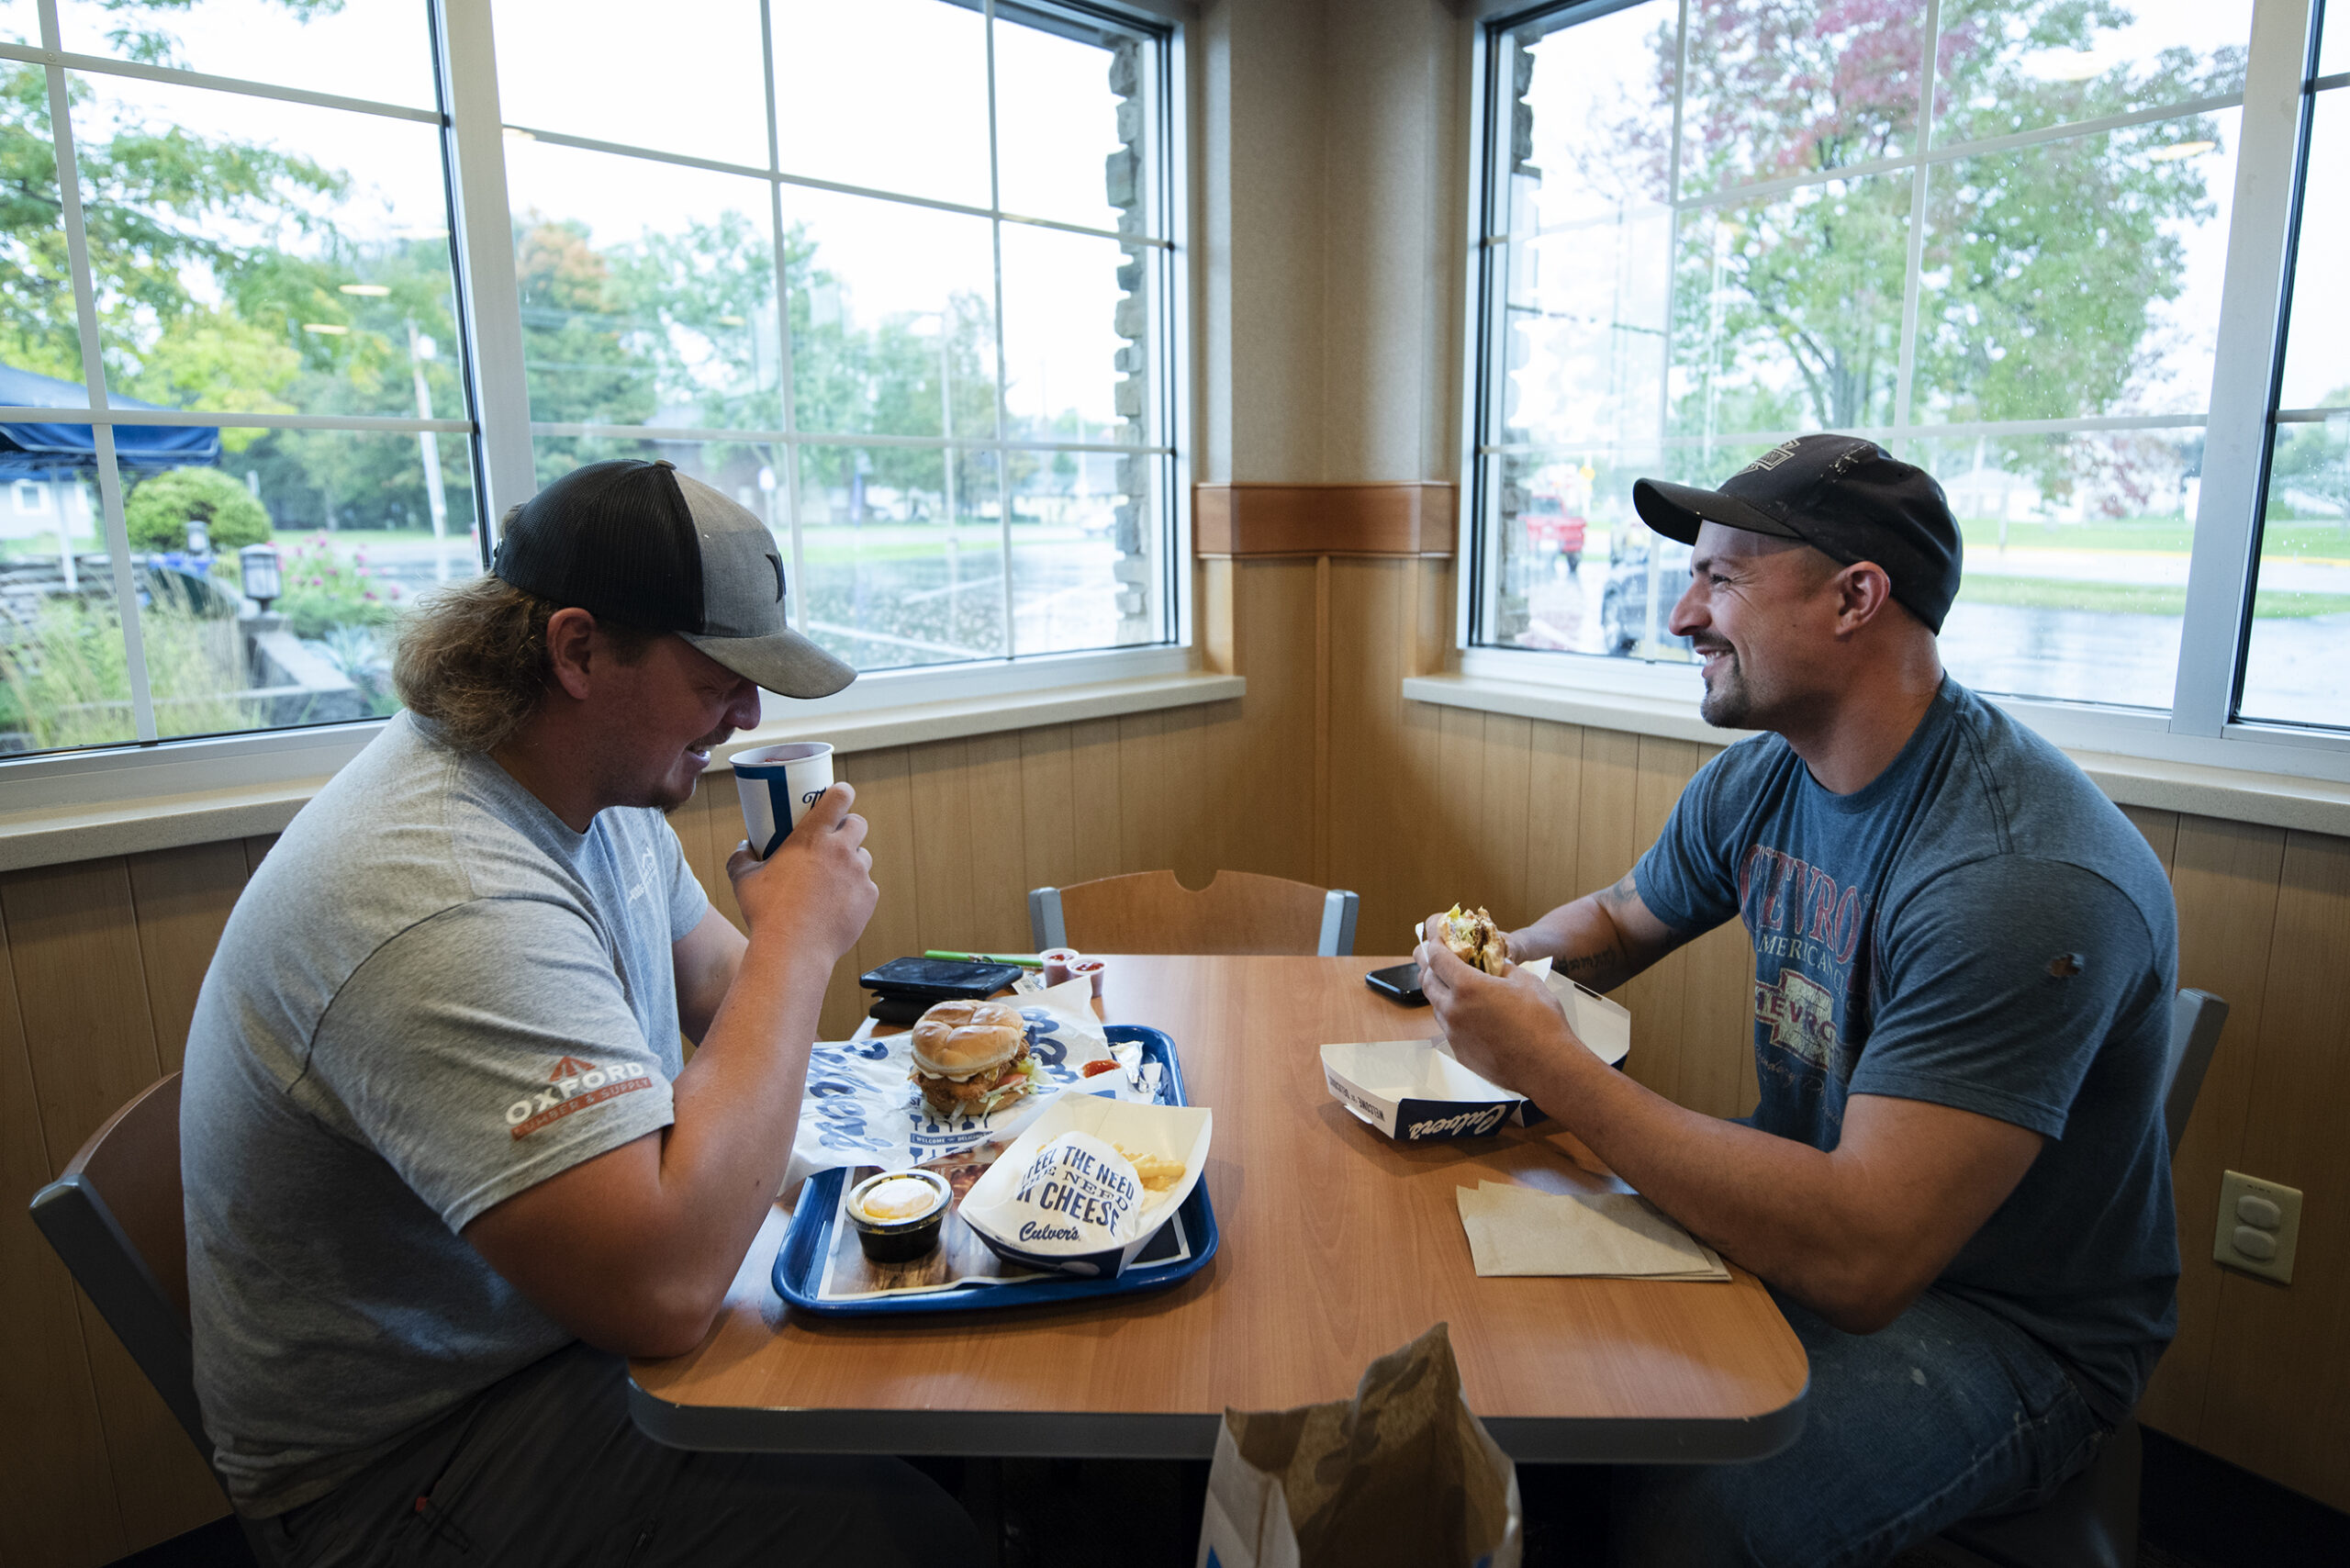 Two customers sit near windows as they eat burgers inside the Culver's dining room.